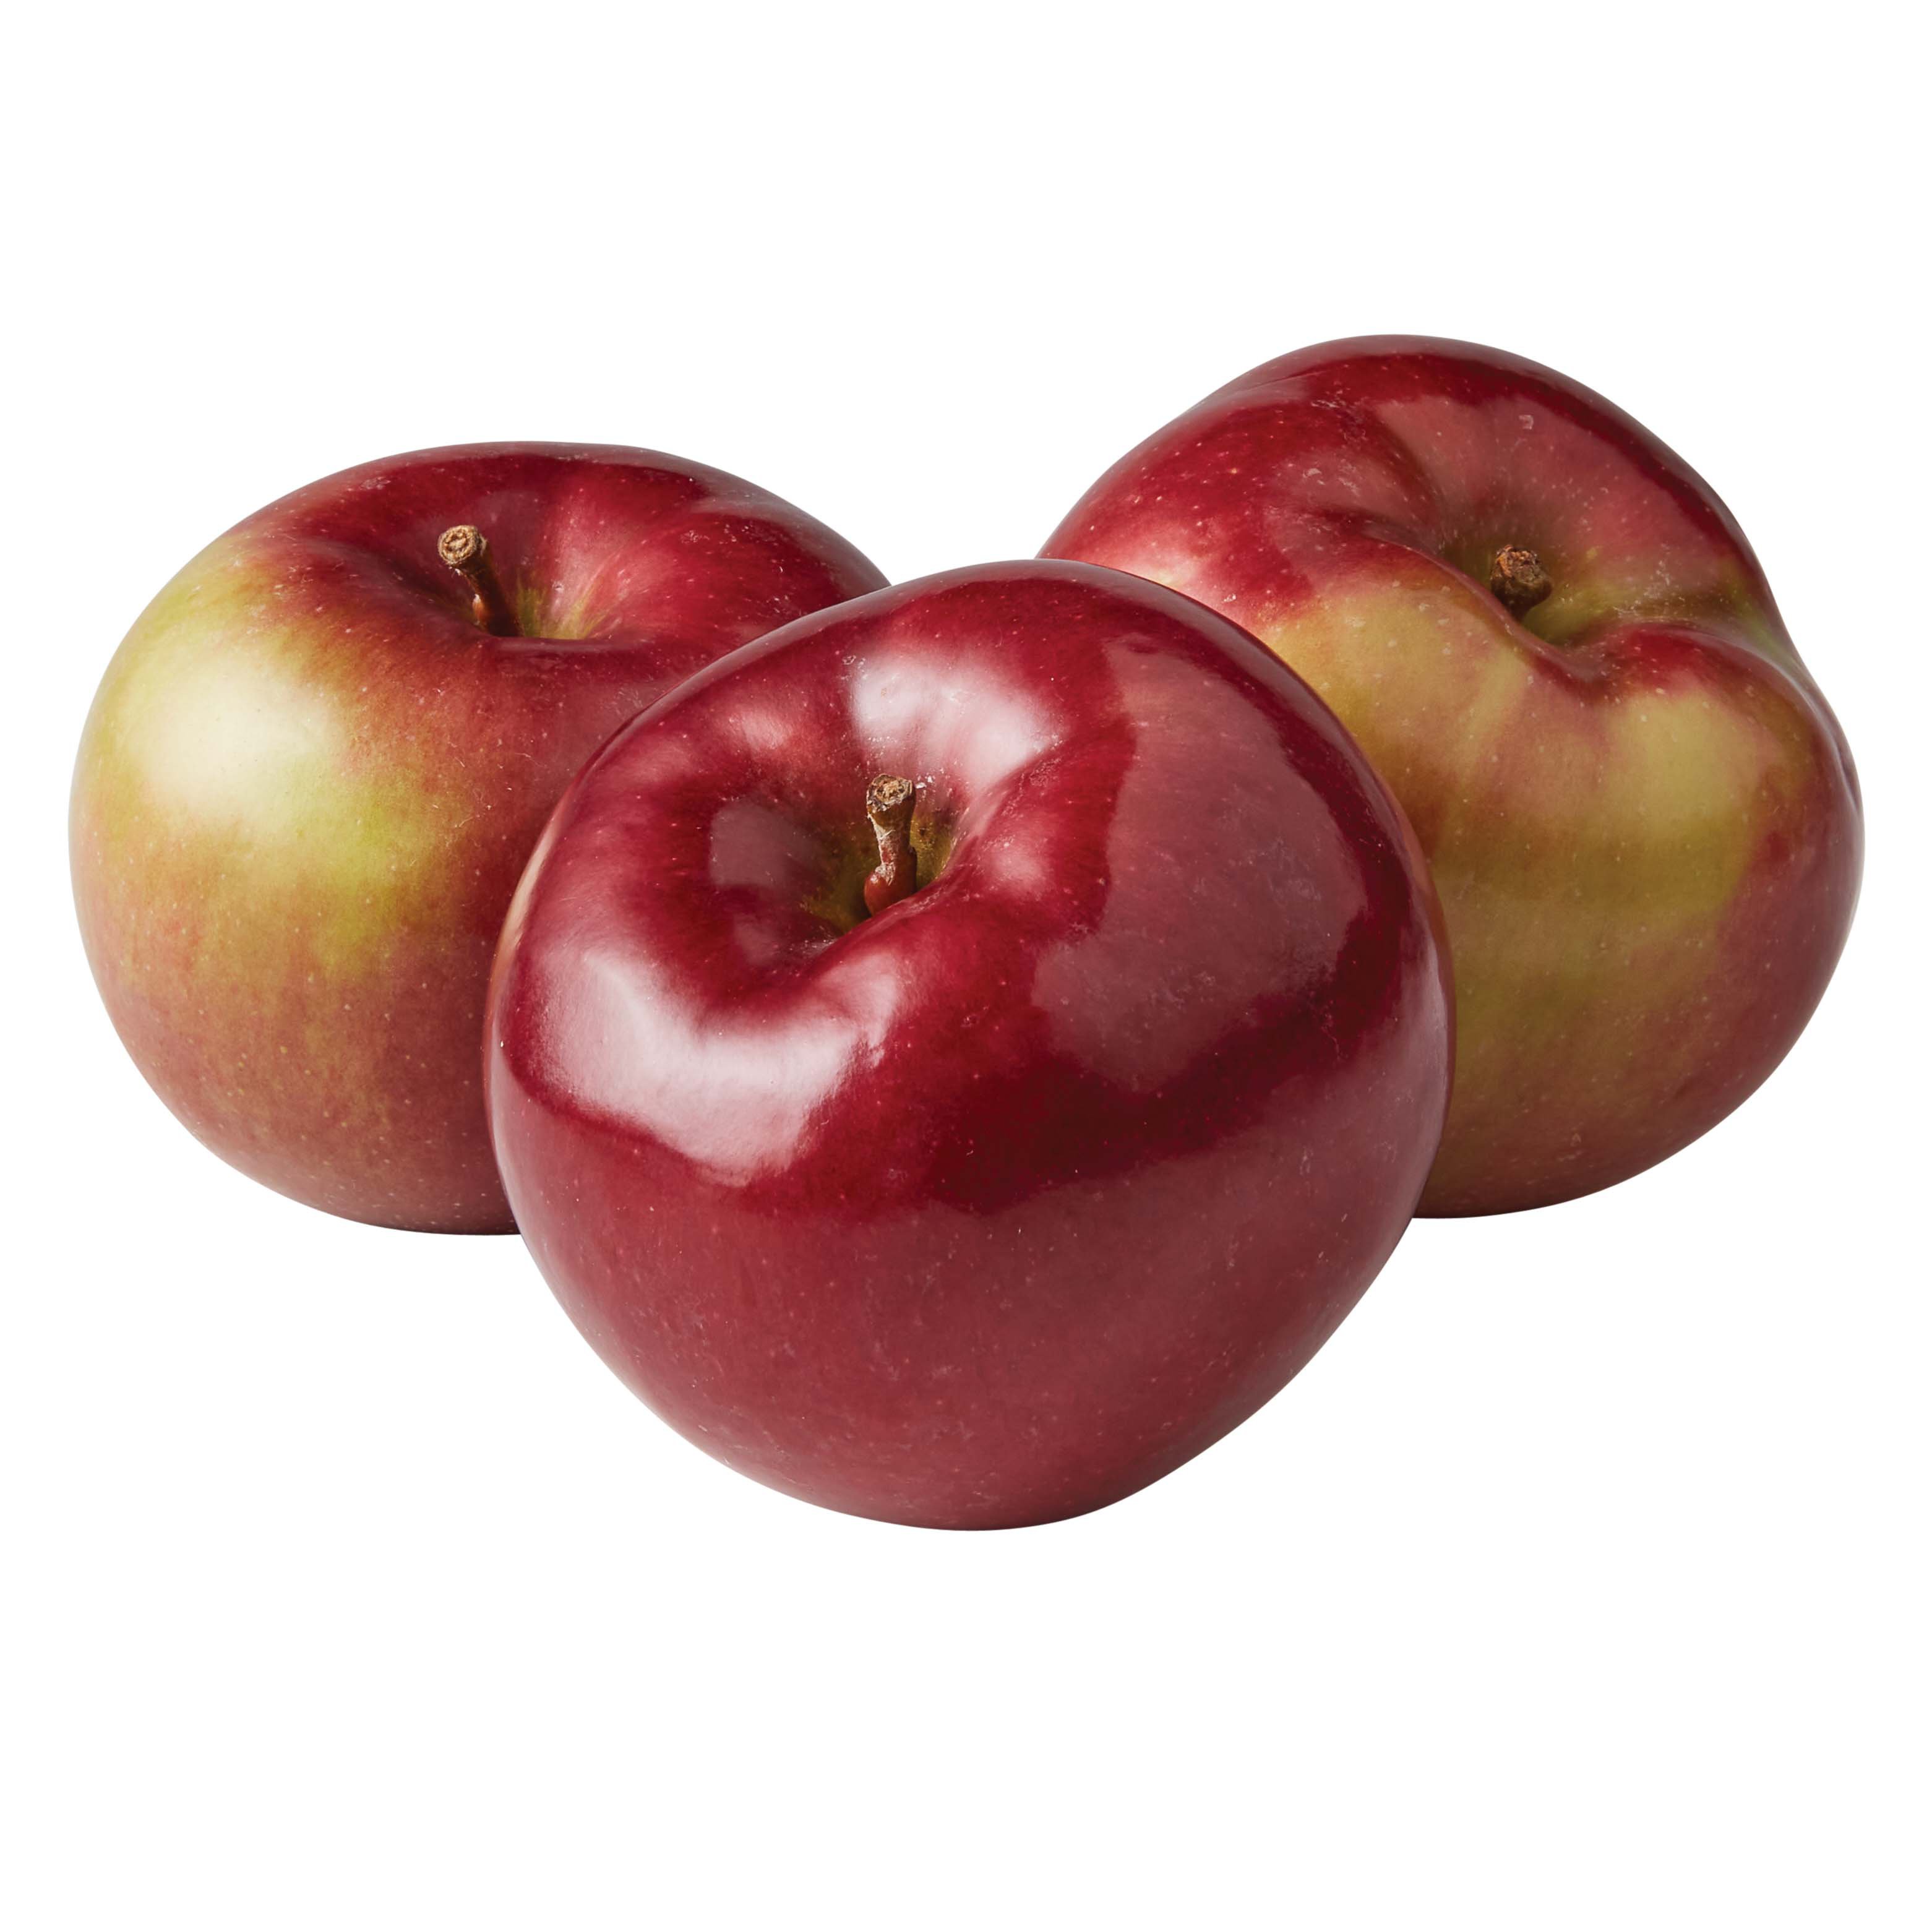 Gala Apple vs Red Delicious Apple: What is the difference?